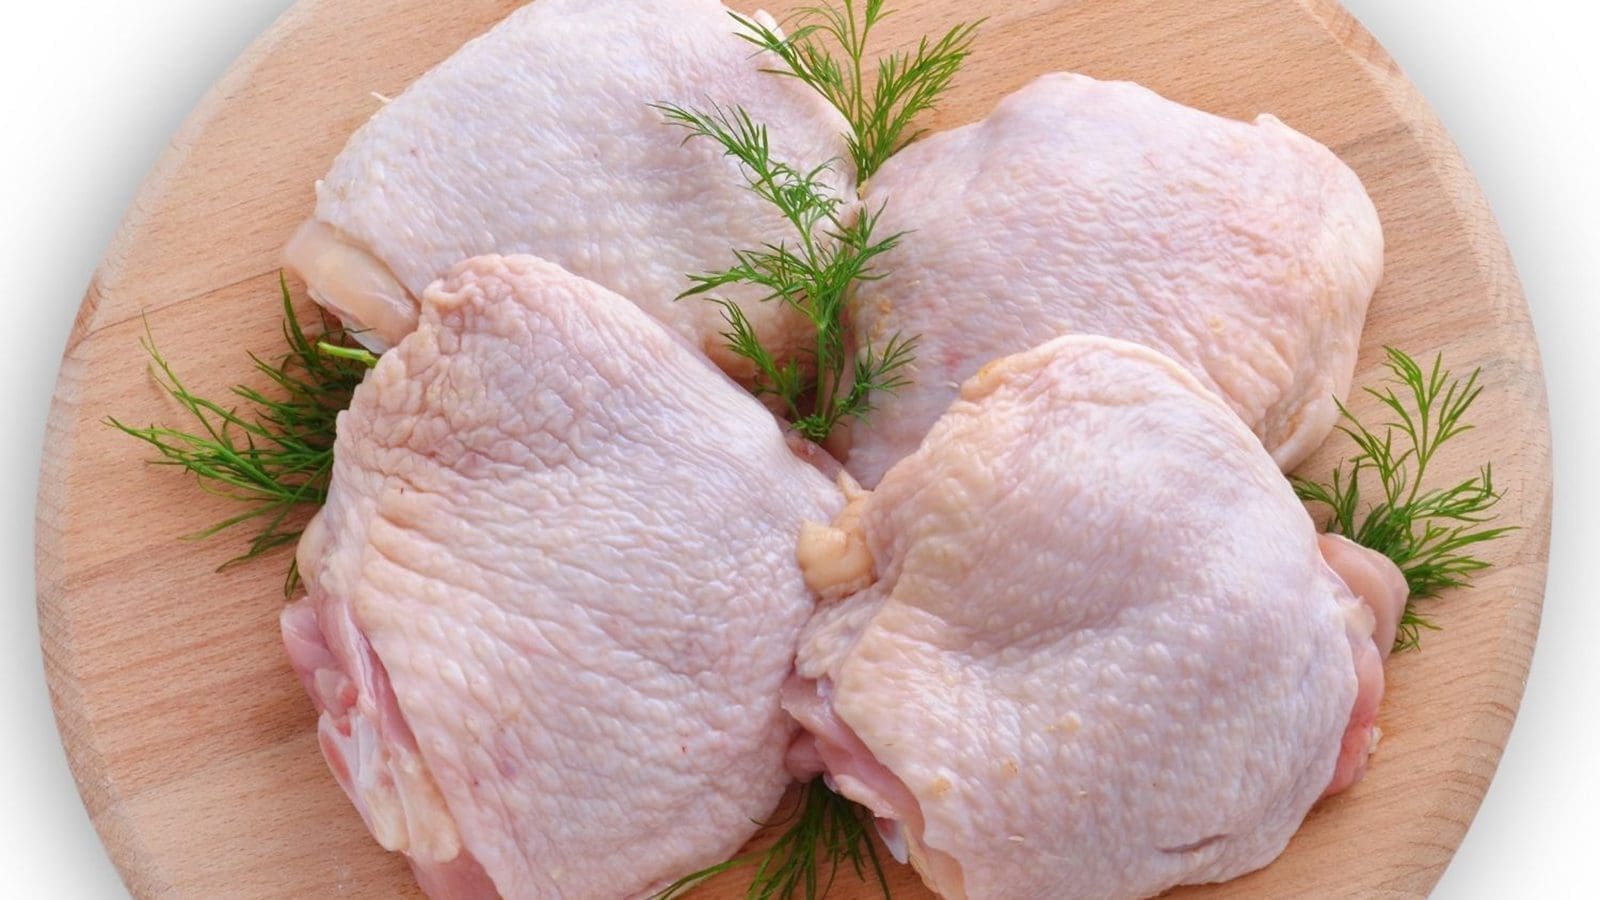 Nigeria’s poultry sector faces imminent collapse as frozen chicken imports threaten industry, PAN warns